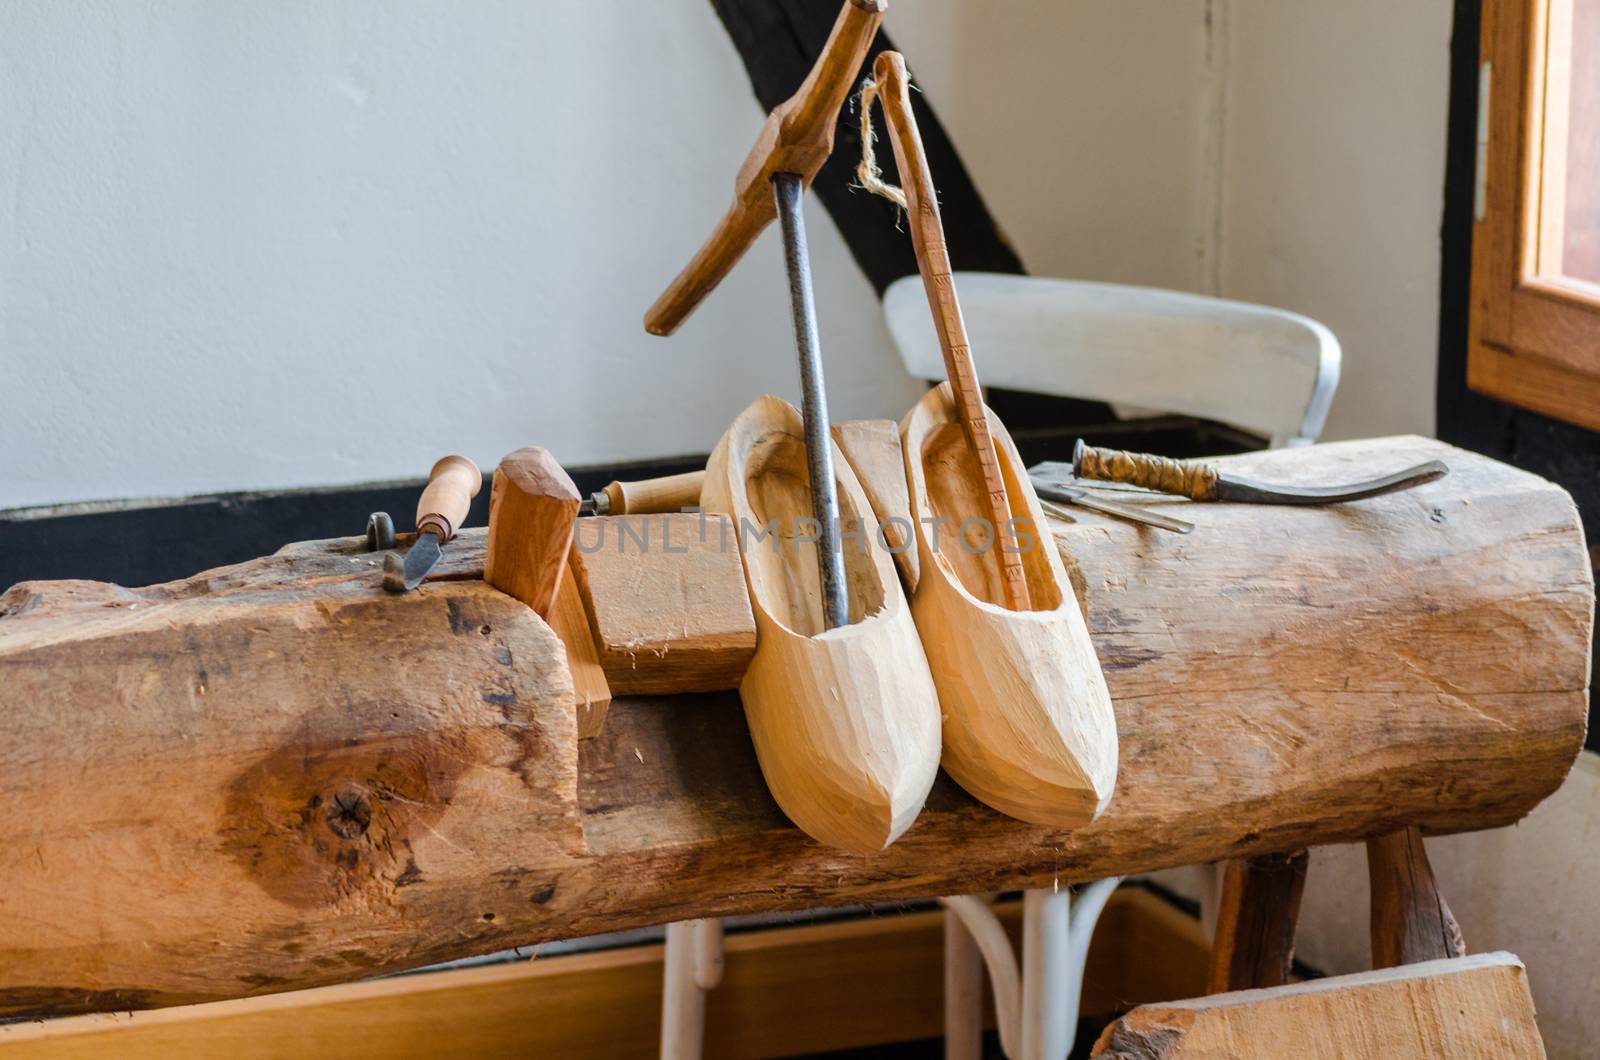 LWL-Open-Air Museum Hagen. 
Images courtesy of the Department of Public Relations. 
A pair of traditional wooden shoe also genann clogs.
Einzelene manufacturing steps of the traditional wooden shoes called clogs.